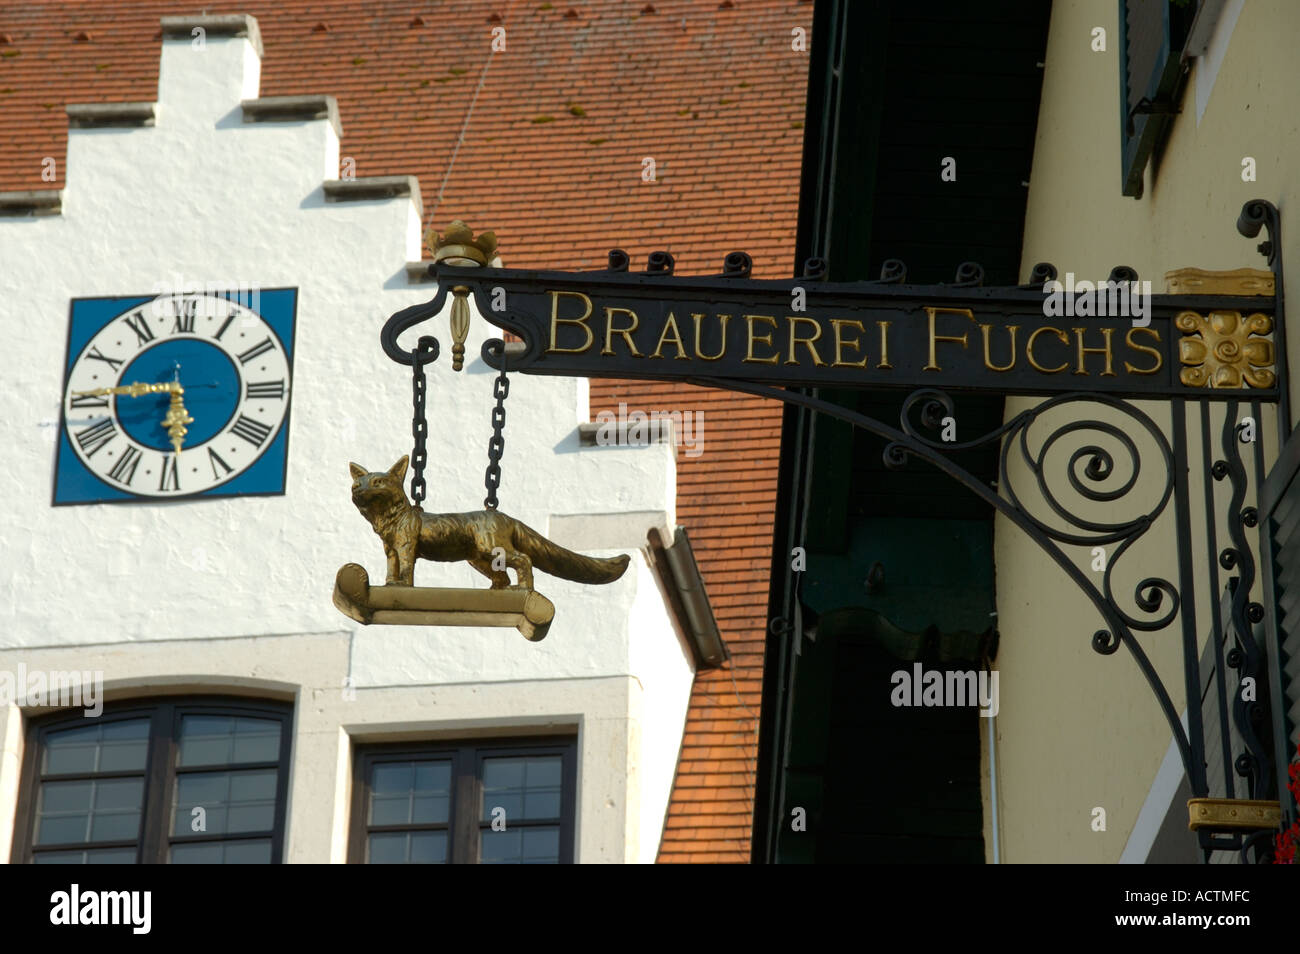 Old iron made restaurant sign Brauerei Fuchs in the city center with typical gable roofs Beilngries Altmuehltal Bavaria Germany Stock Photo